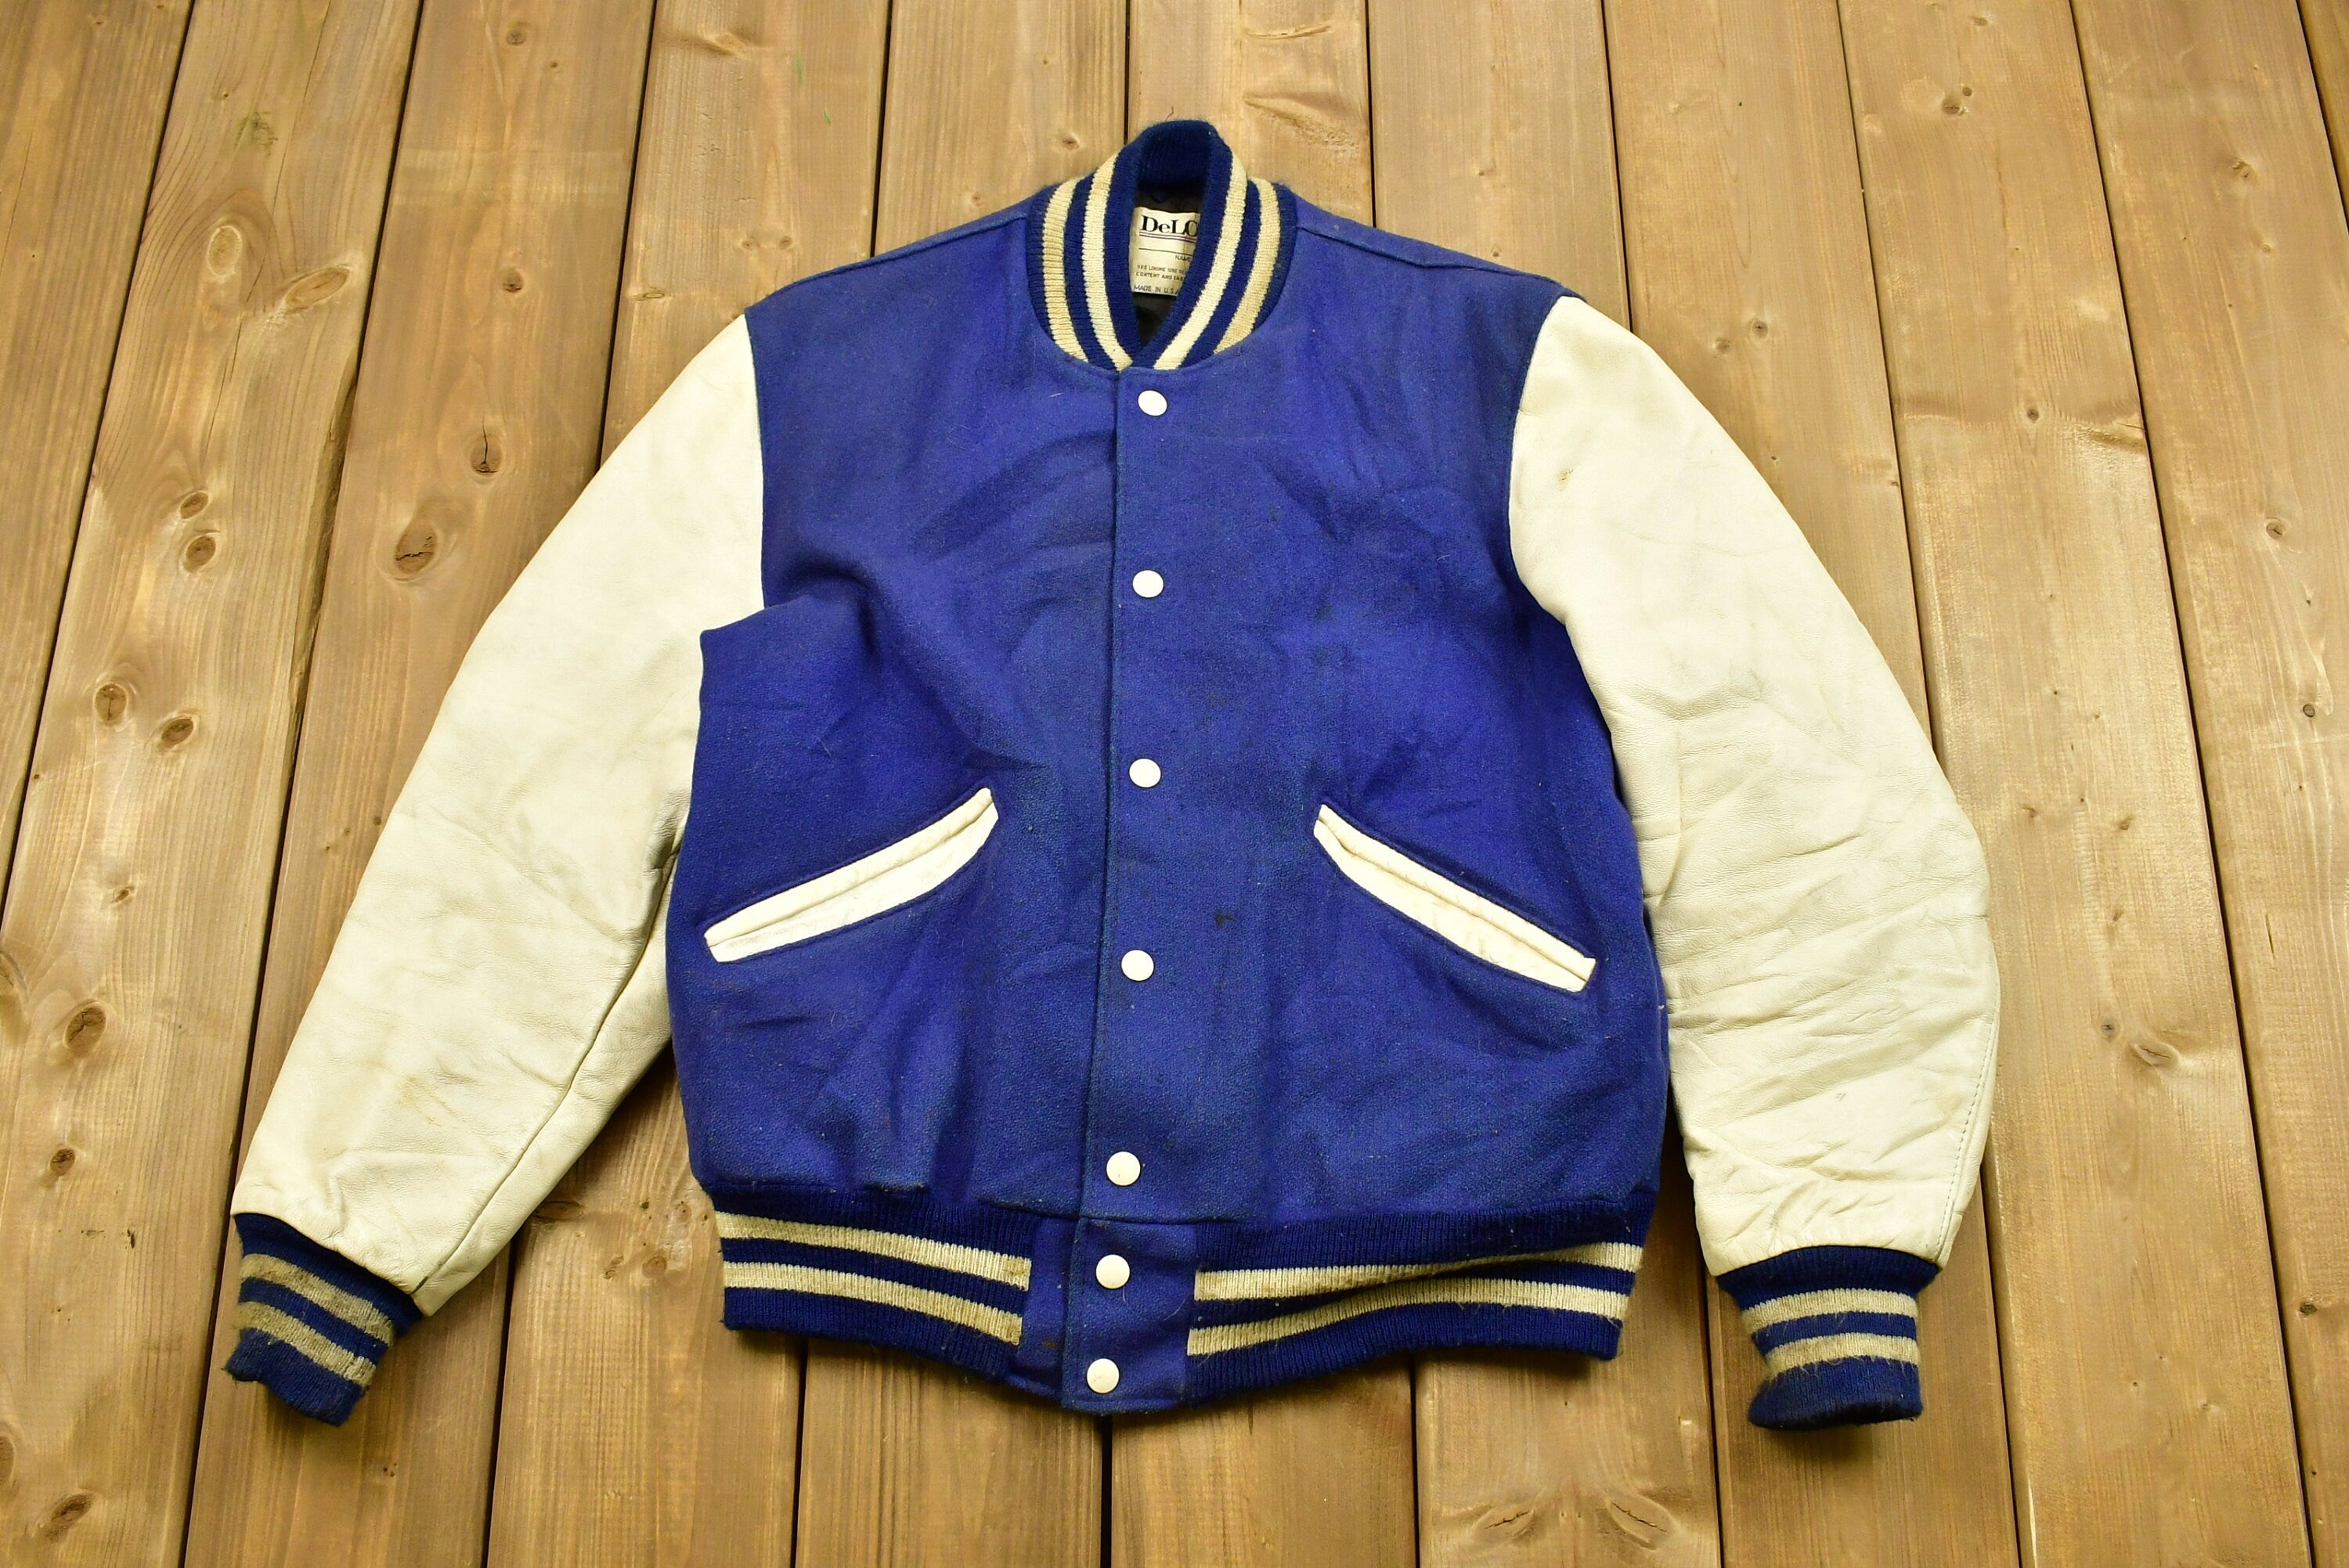 Vintage 80s / 90s / Quincy Maddox Leather Delong Varsity Jacket /Letterman  Jacket / Leather Coat / Made In USA / Streetwear Fashion